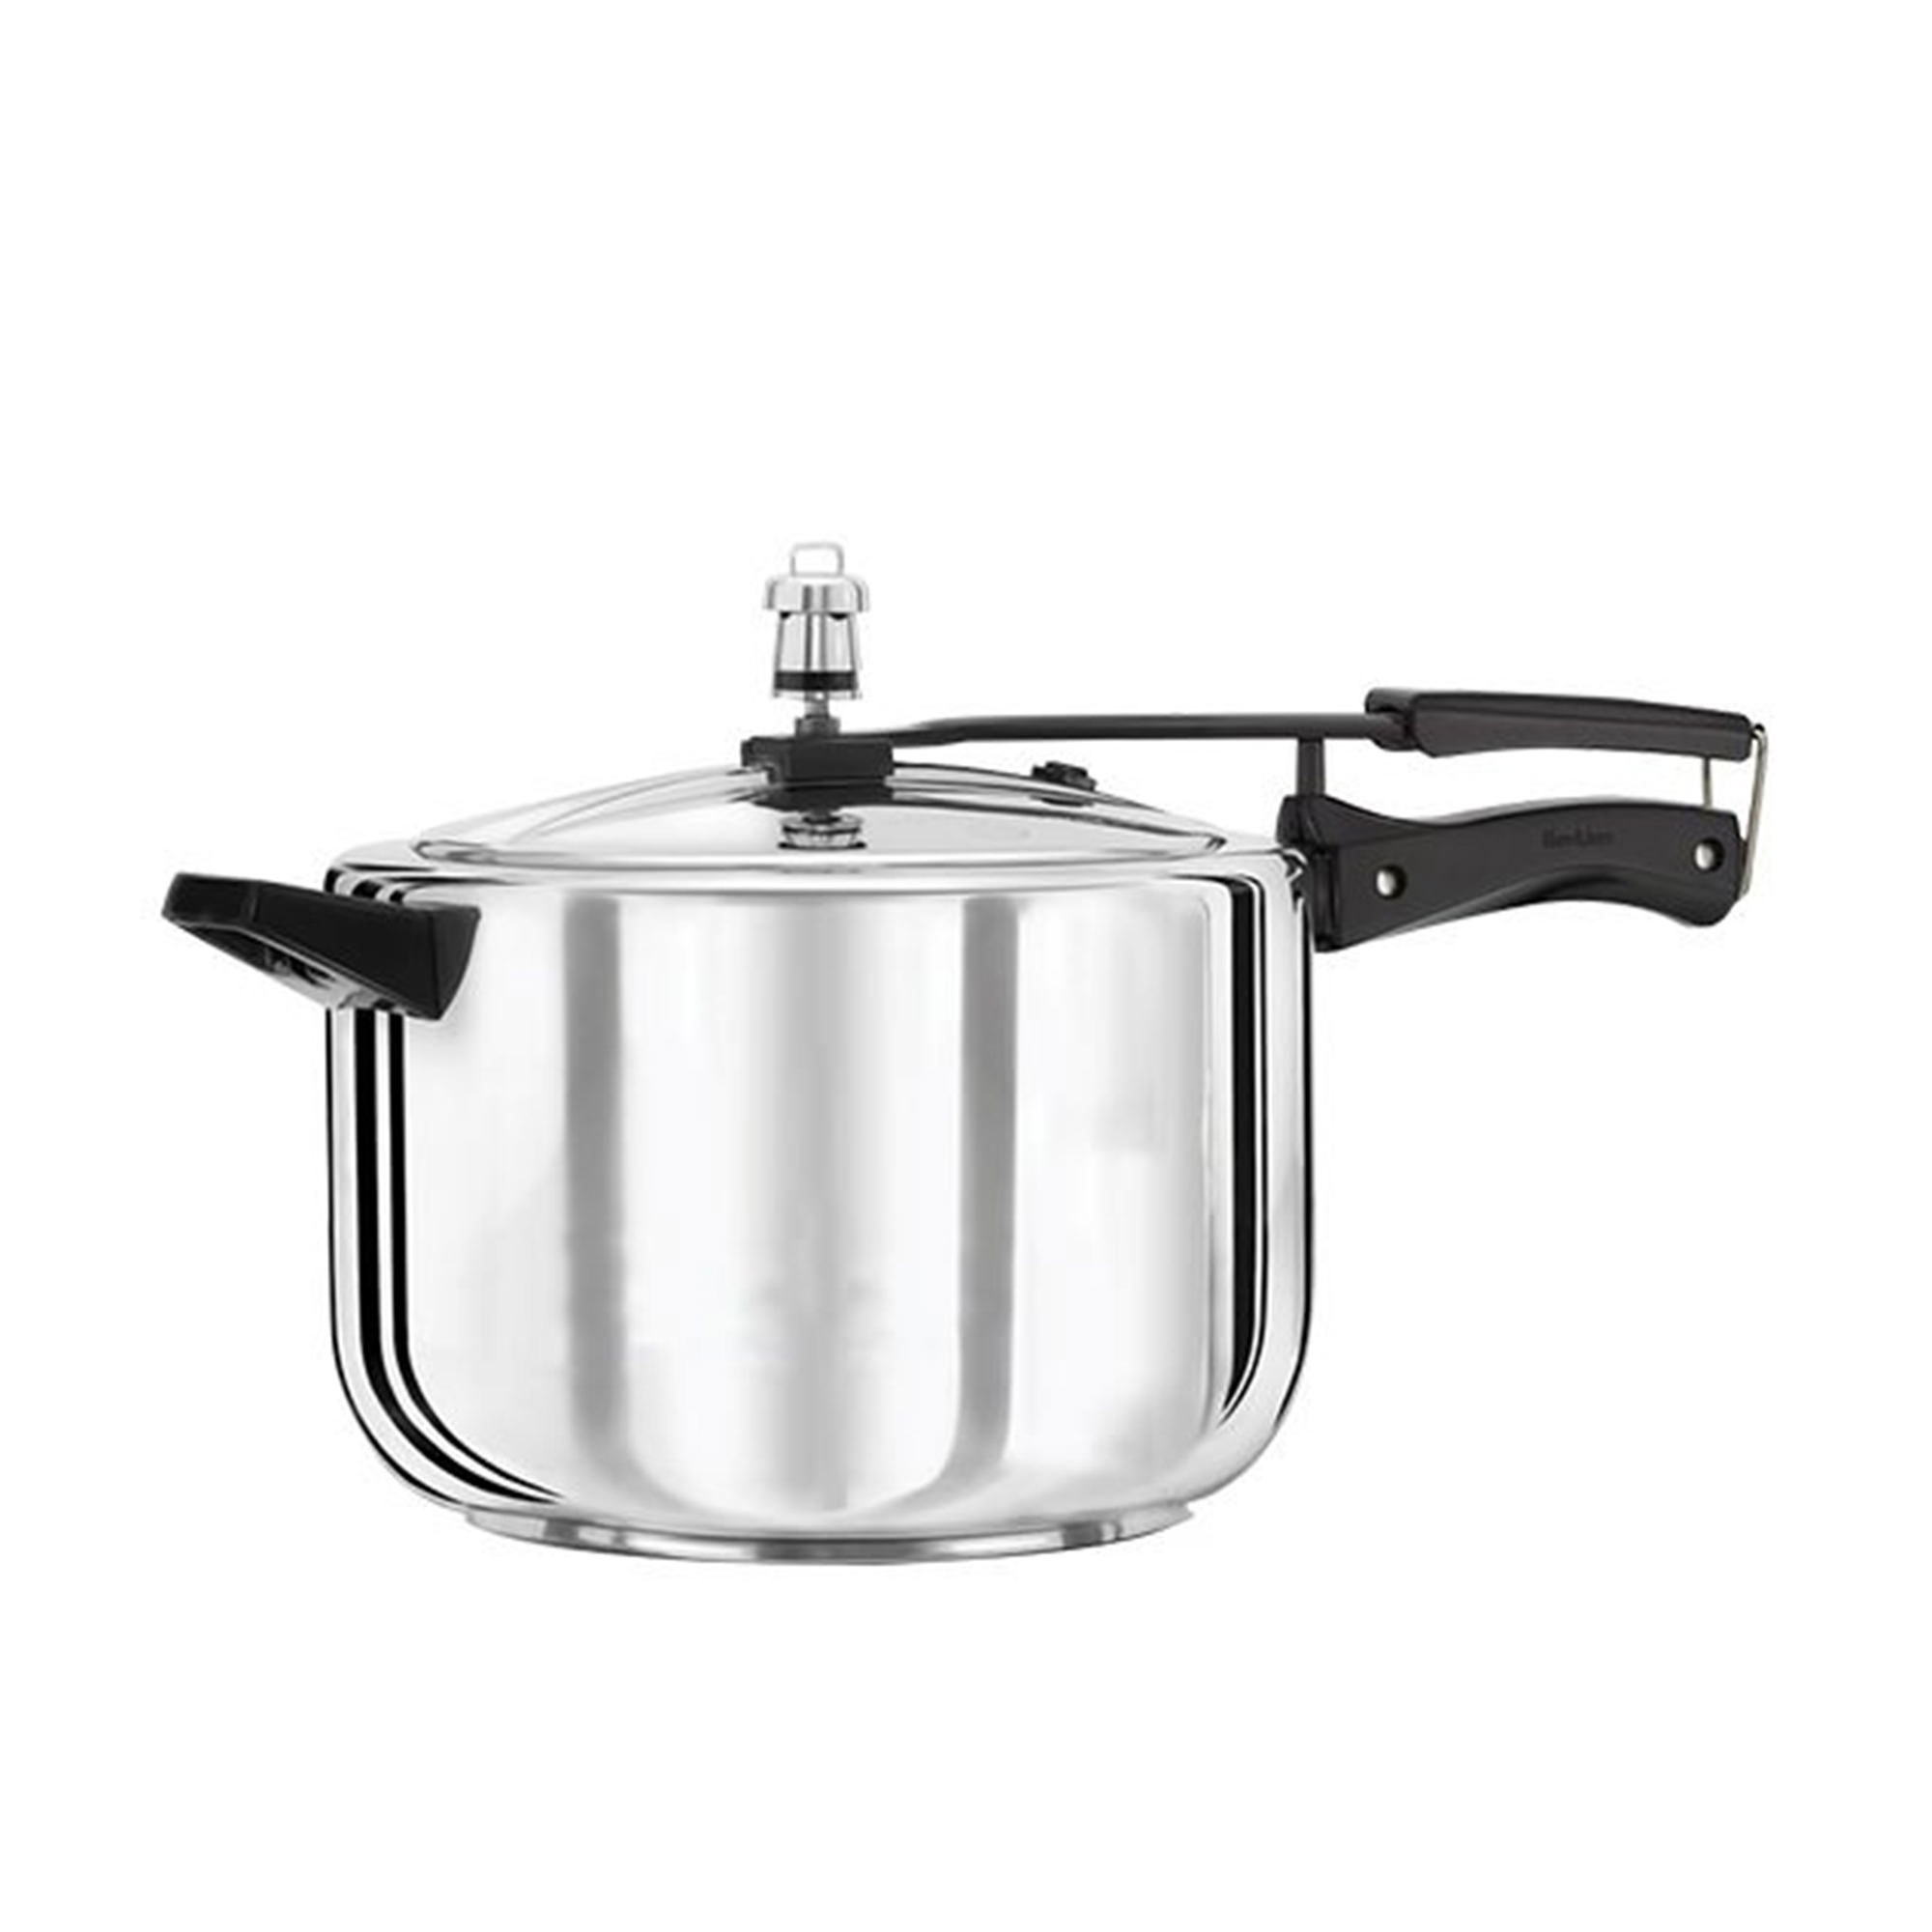 Hawkins Induction Stainless Steel Pressure Cooker 5L Image 1